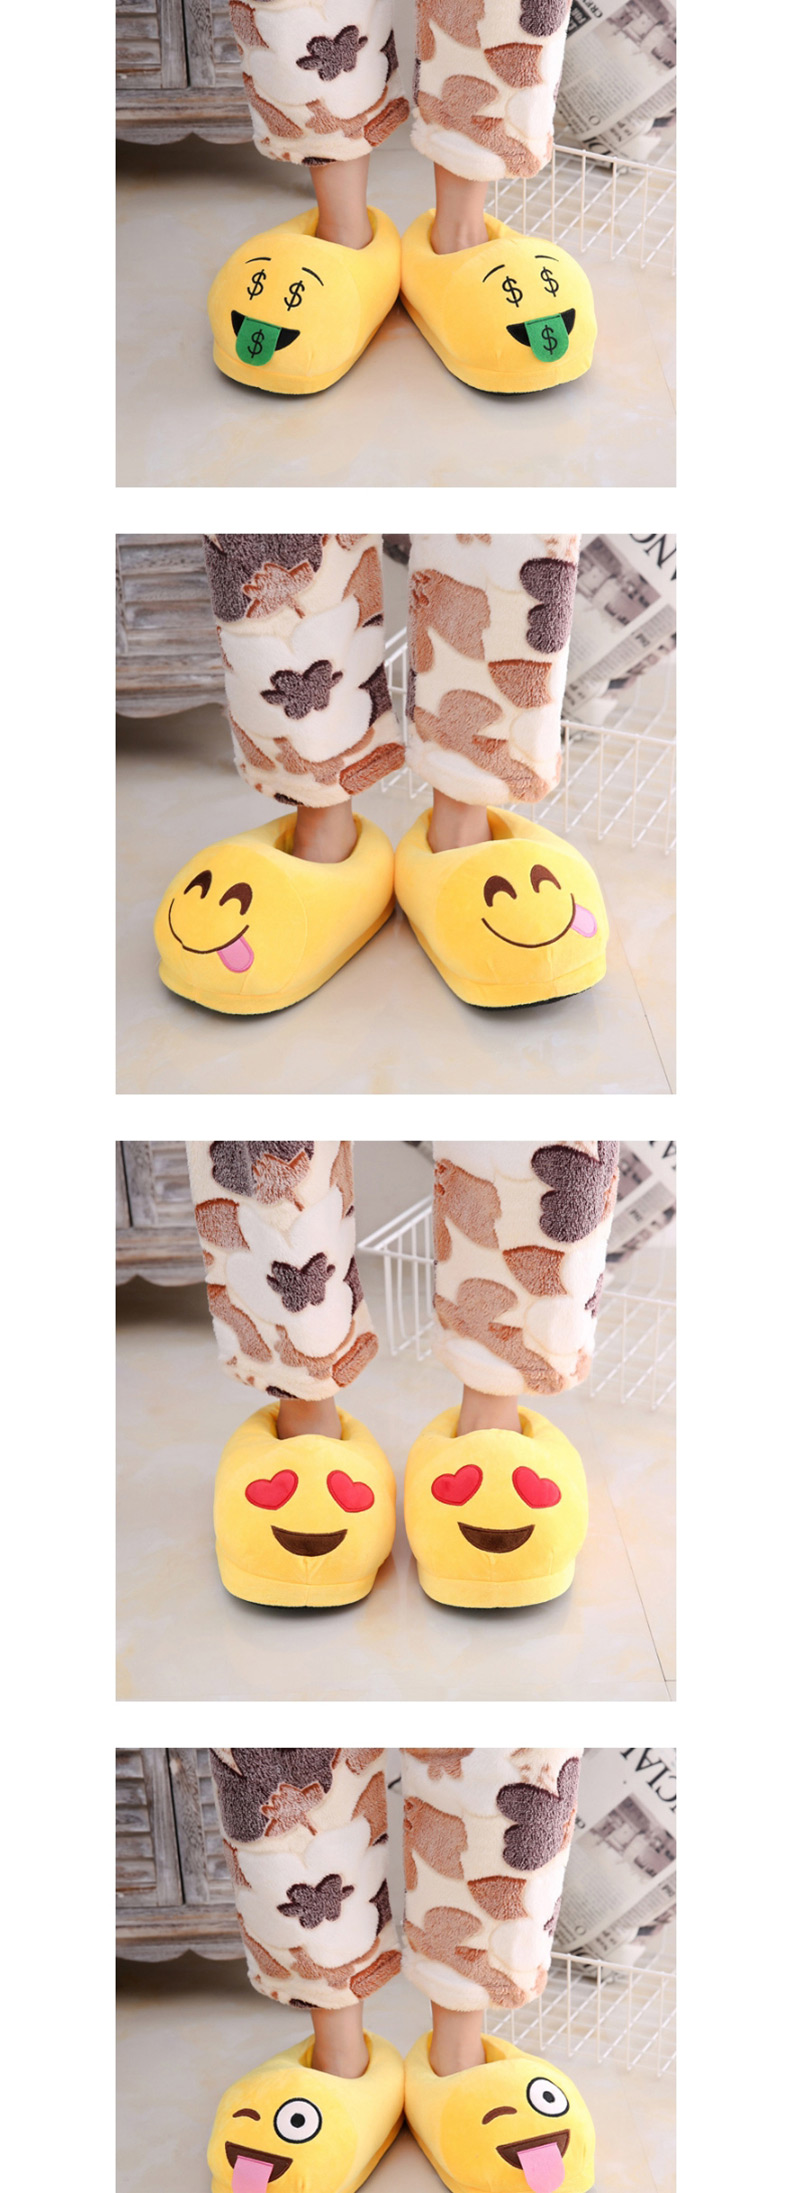 Fashion 8 Yellow Cartoon Expression Plush Bag With Cotton Slippers,Slippers